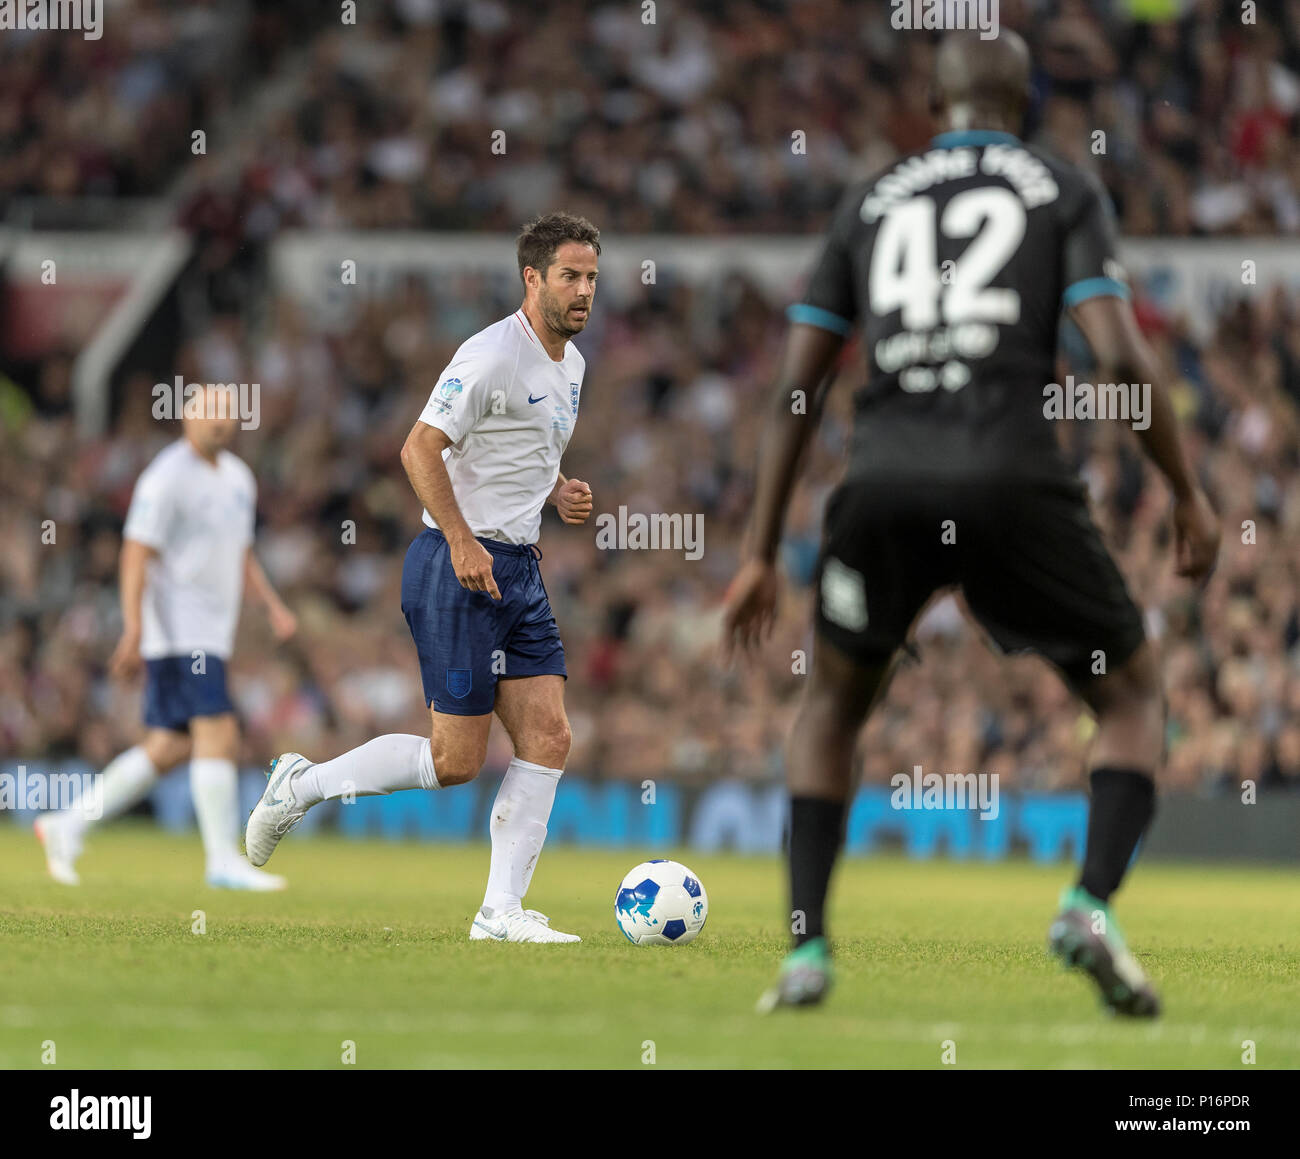 Manchester, England.10th June,2018. Jamie Redknapp is faced by Yaya Toure during the Soccer Aid charity football match between an England X1 and a World X1. Each team of A-list celebrities and Sporting legends are fundraising for UNICEF. © Andy Gutteridge/ Image and Events/ Alamy Live News Stock Photo